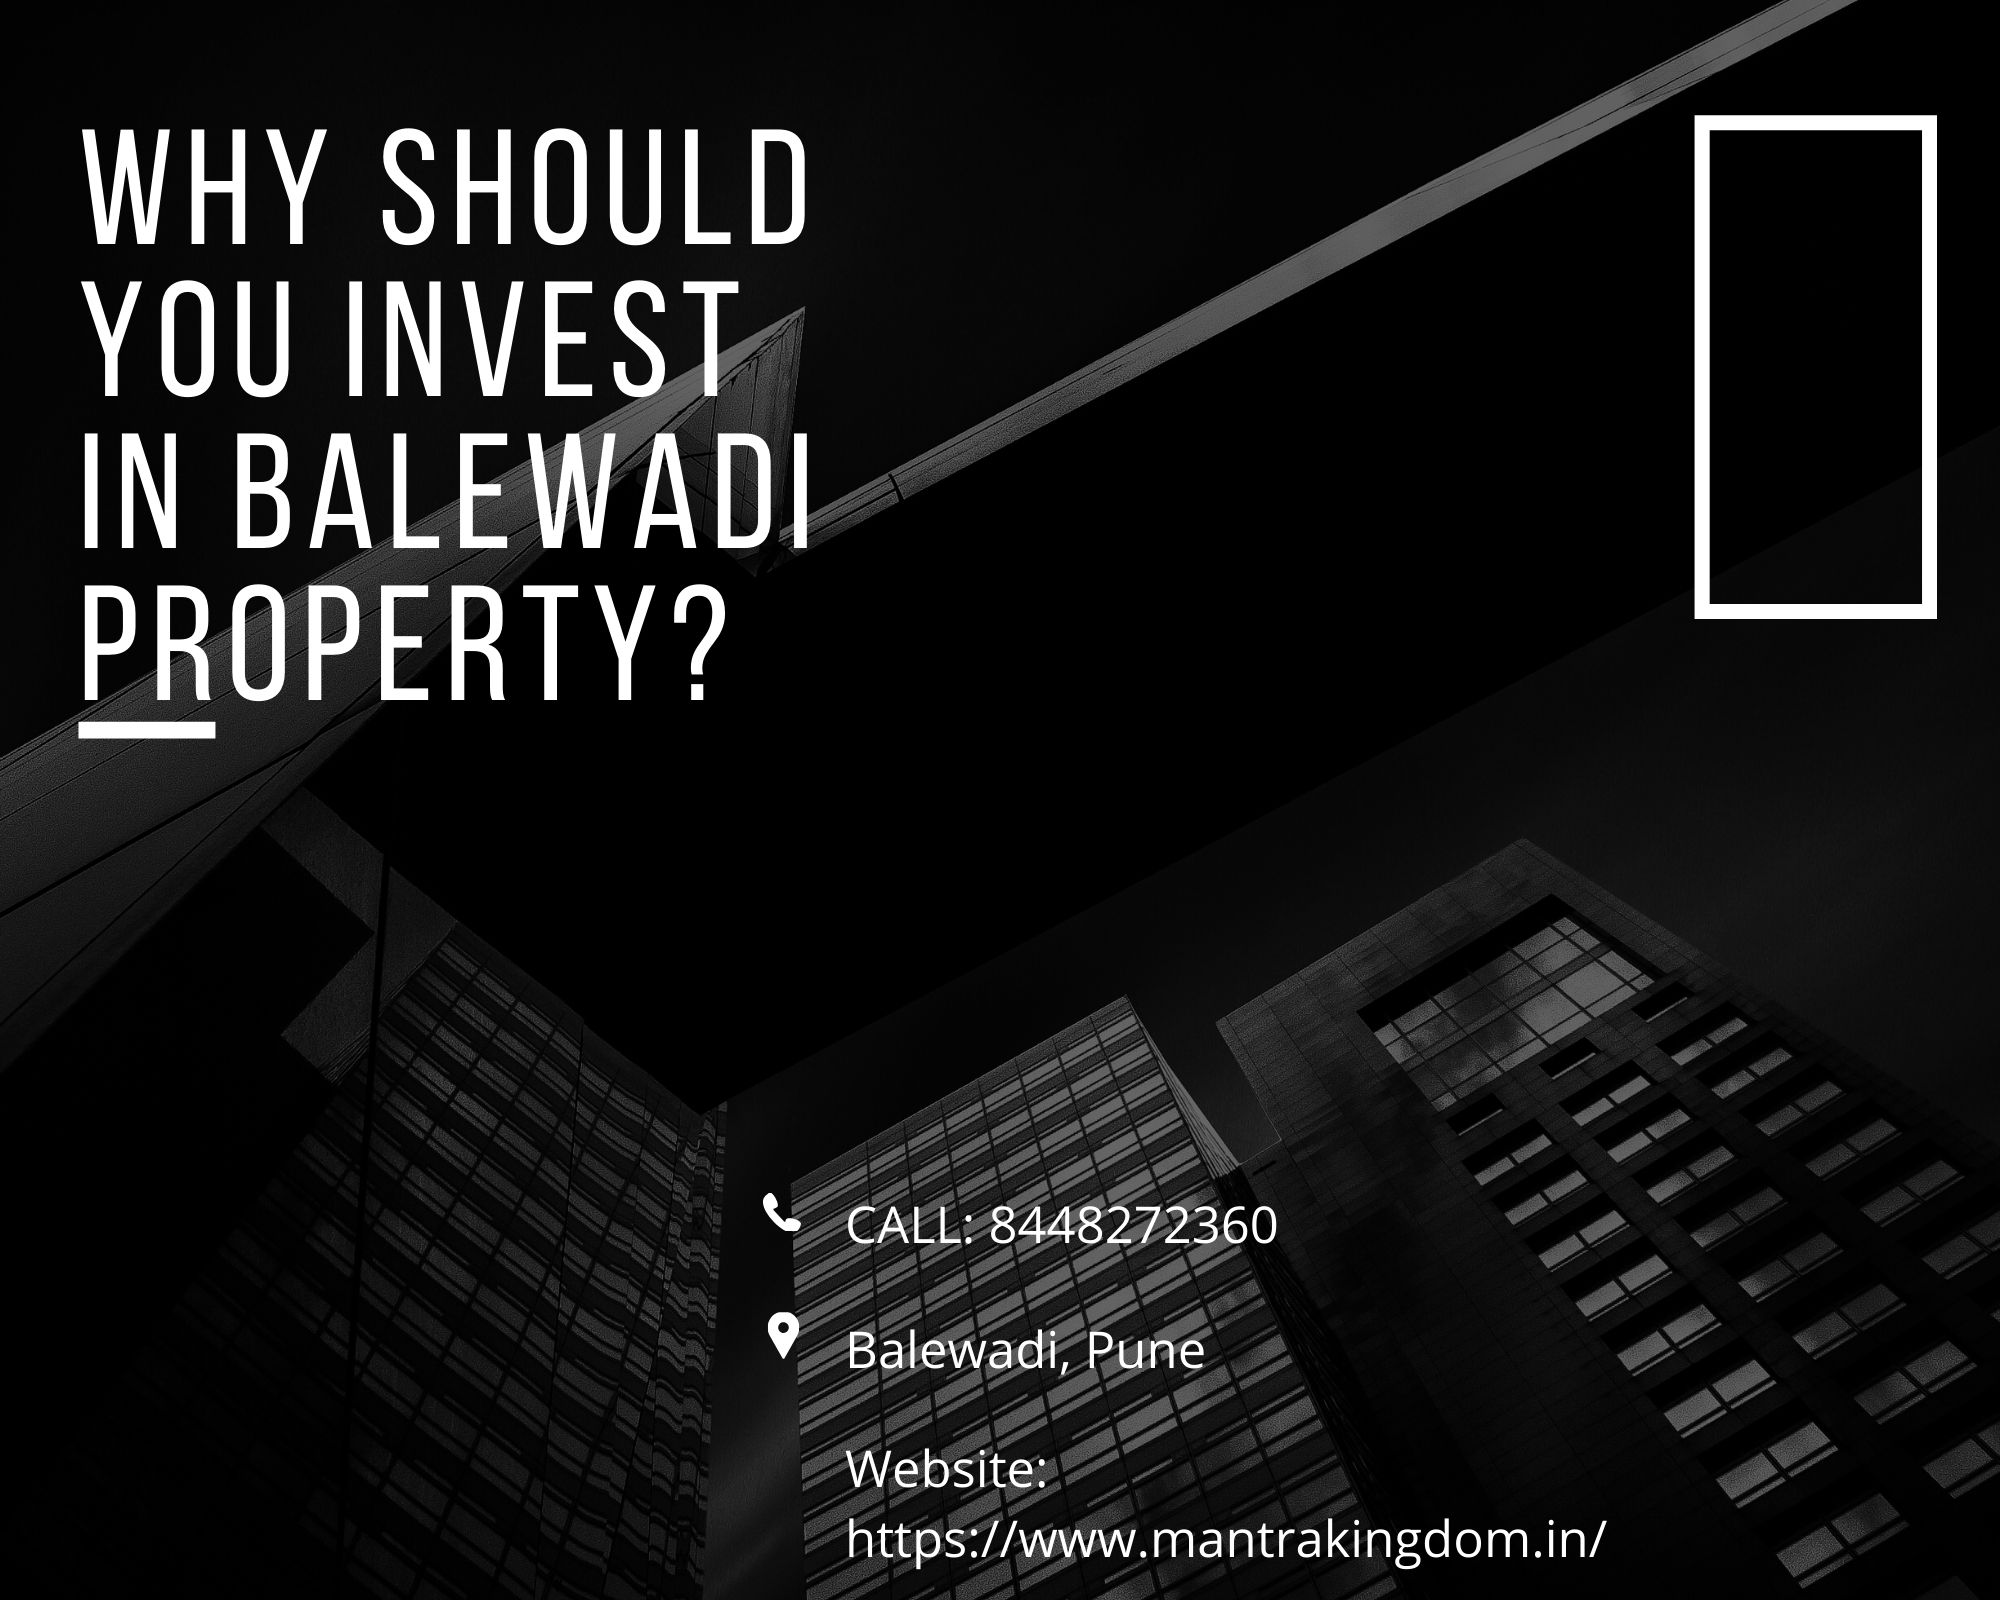 Why should you invest in Balewadi property?